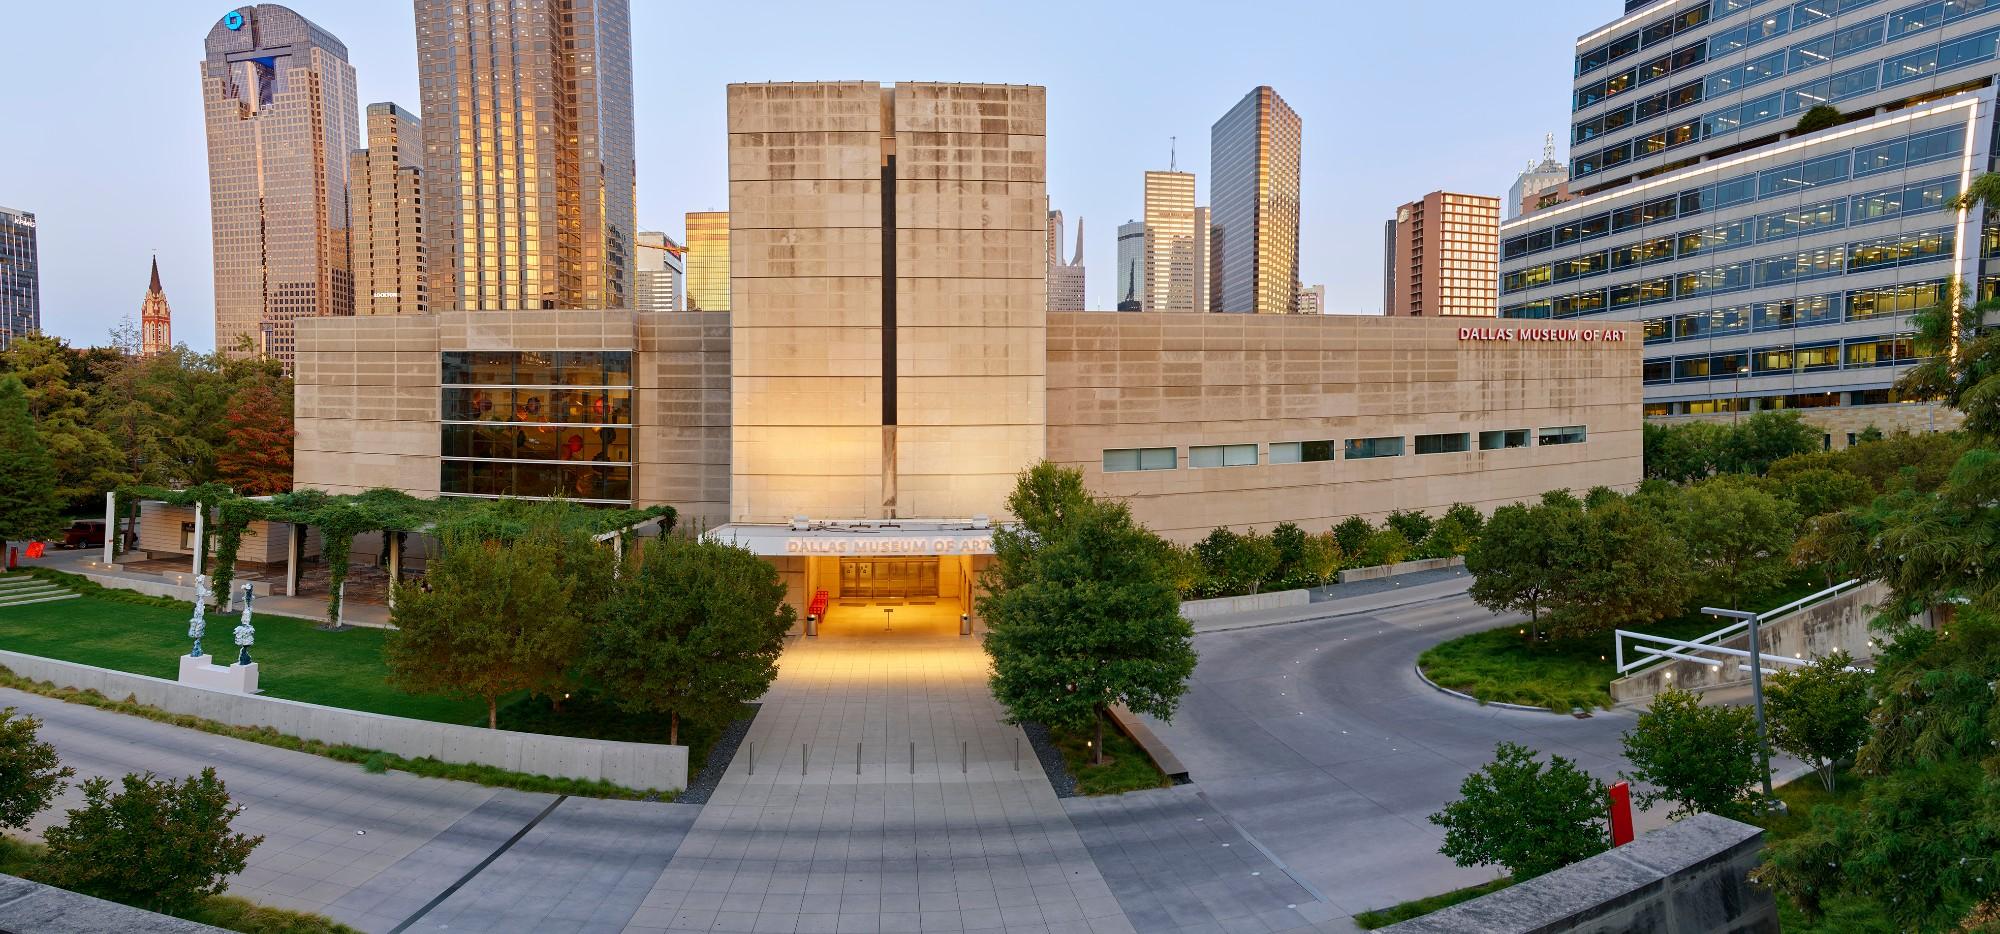 Top 3 Best Art Museums You Need To Visit While In Dallas, Texas